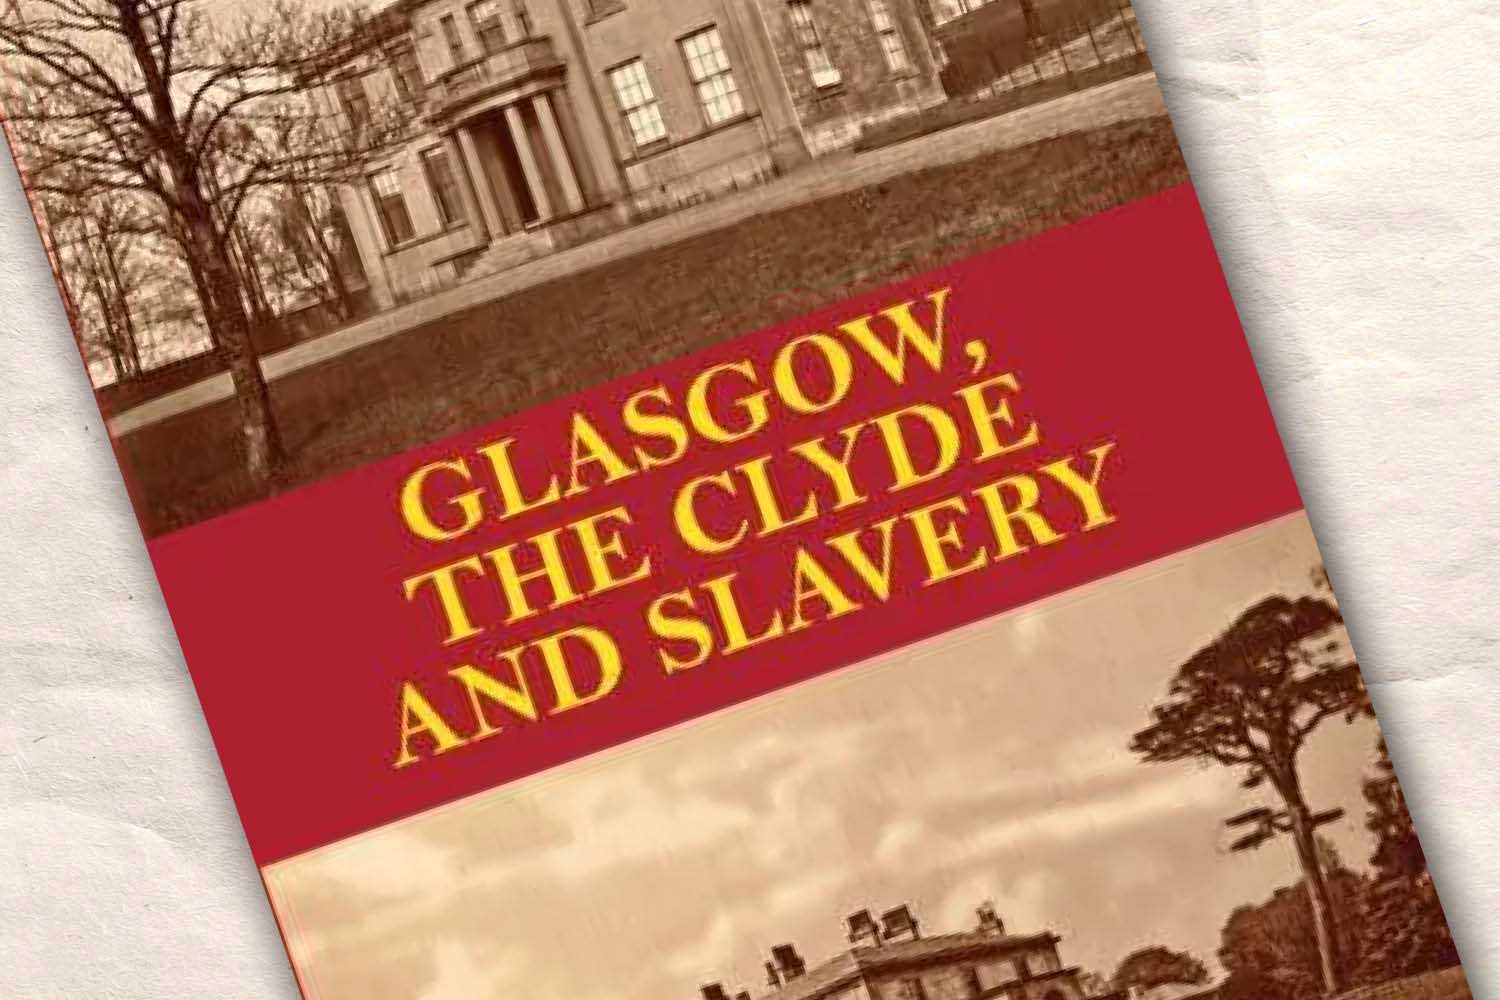 Glasgow, The Clyde and Slavery